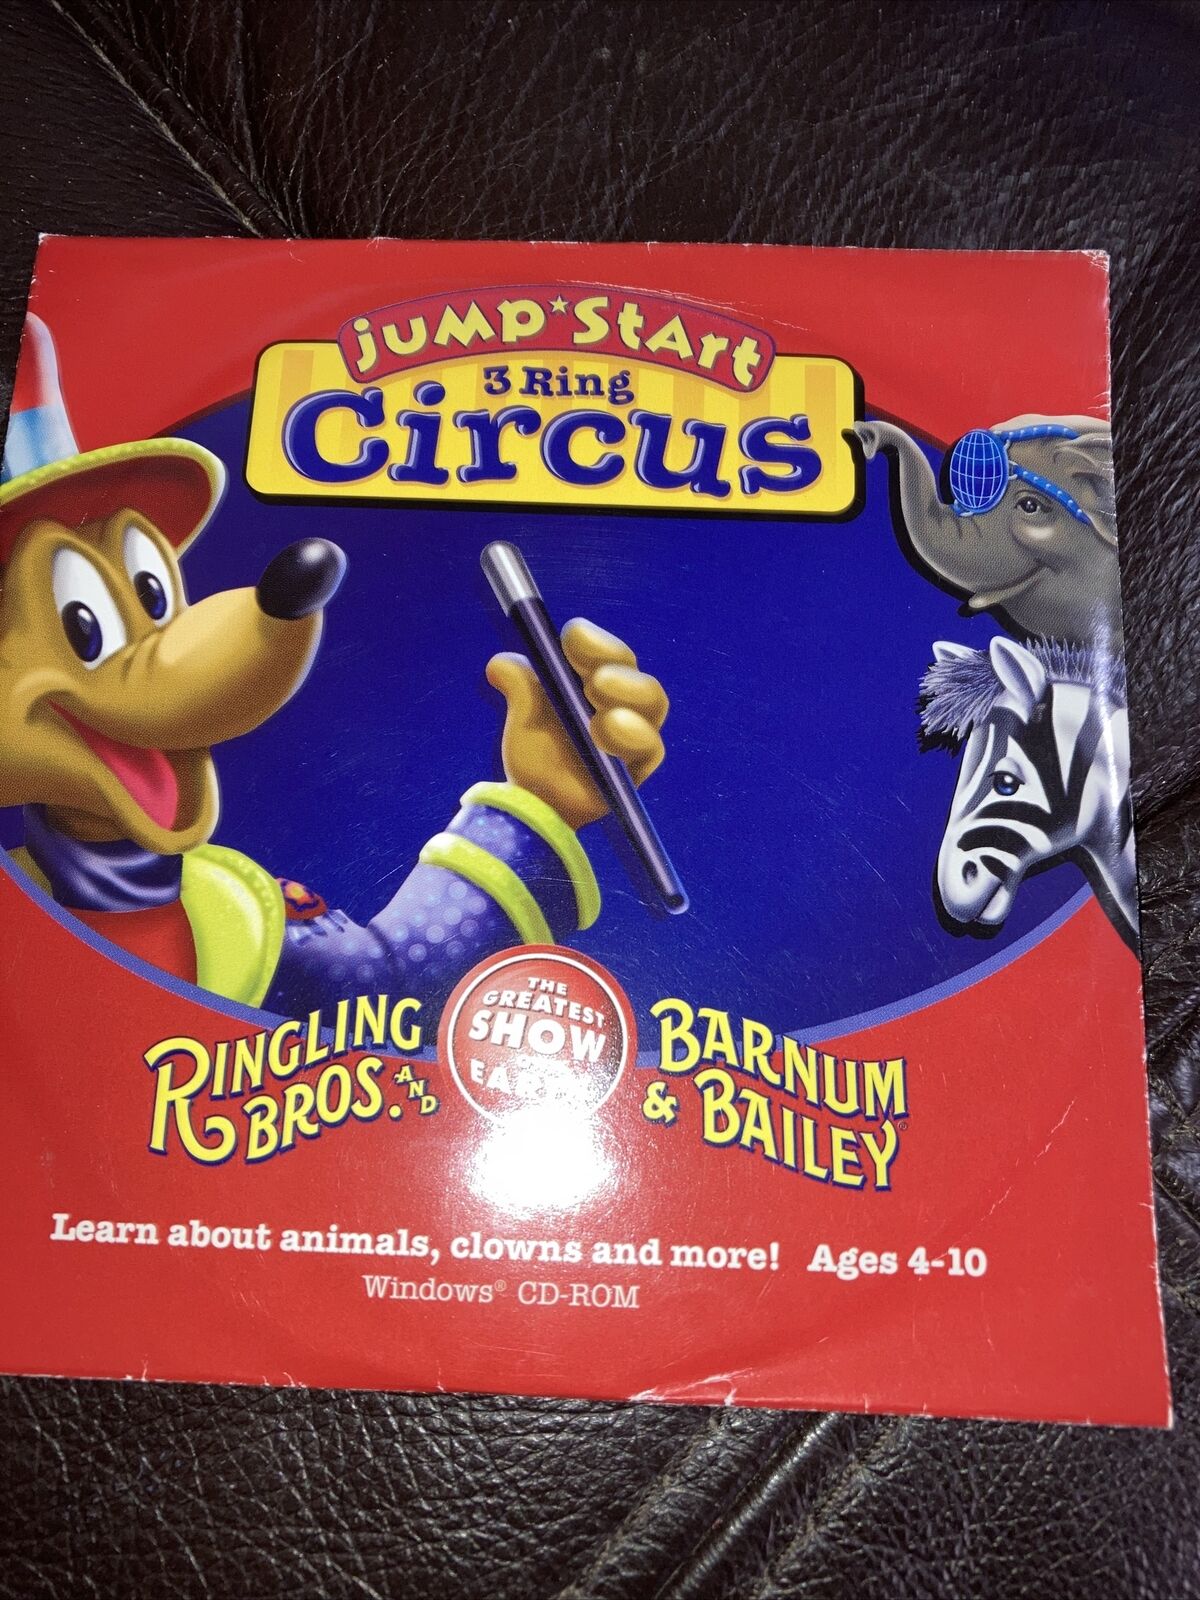 Jump Start 3-Ring circus Windows CD ROM learn about clowns & animals CD